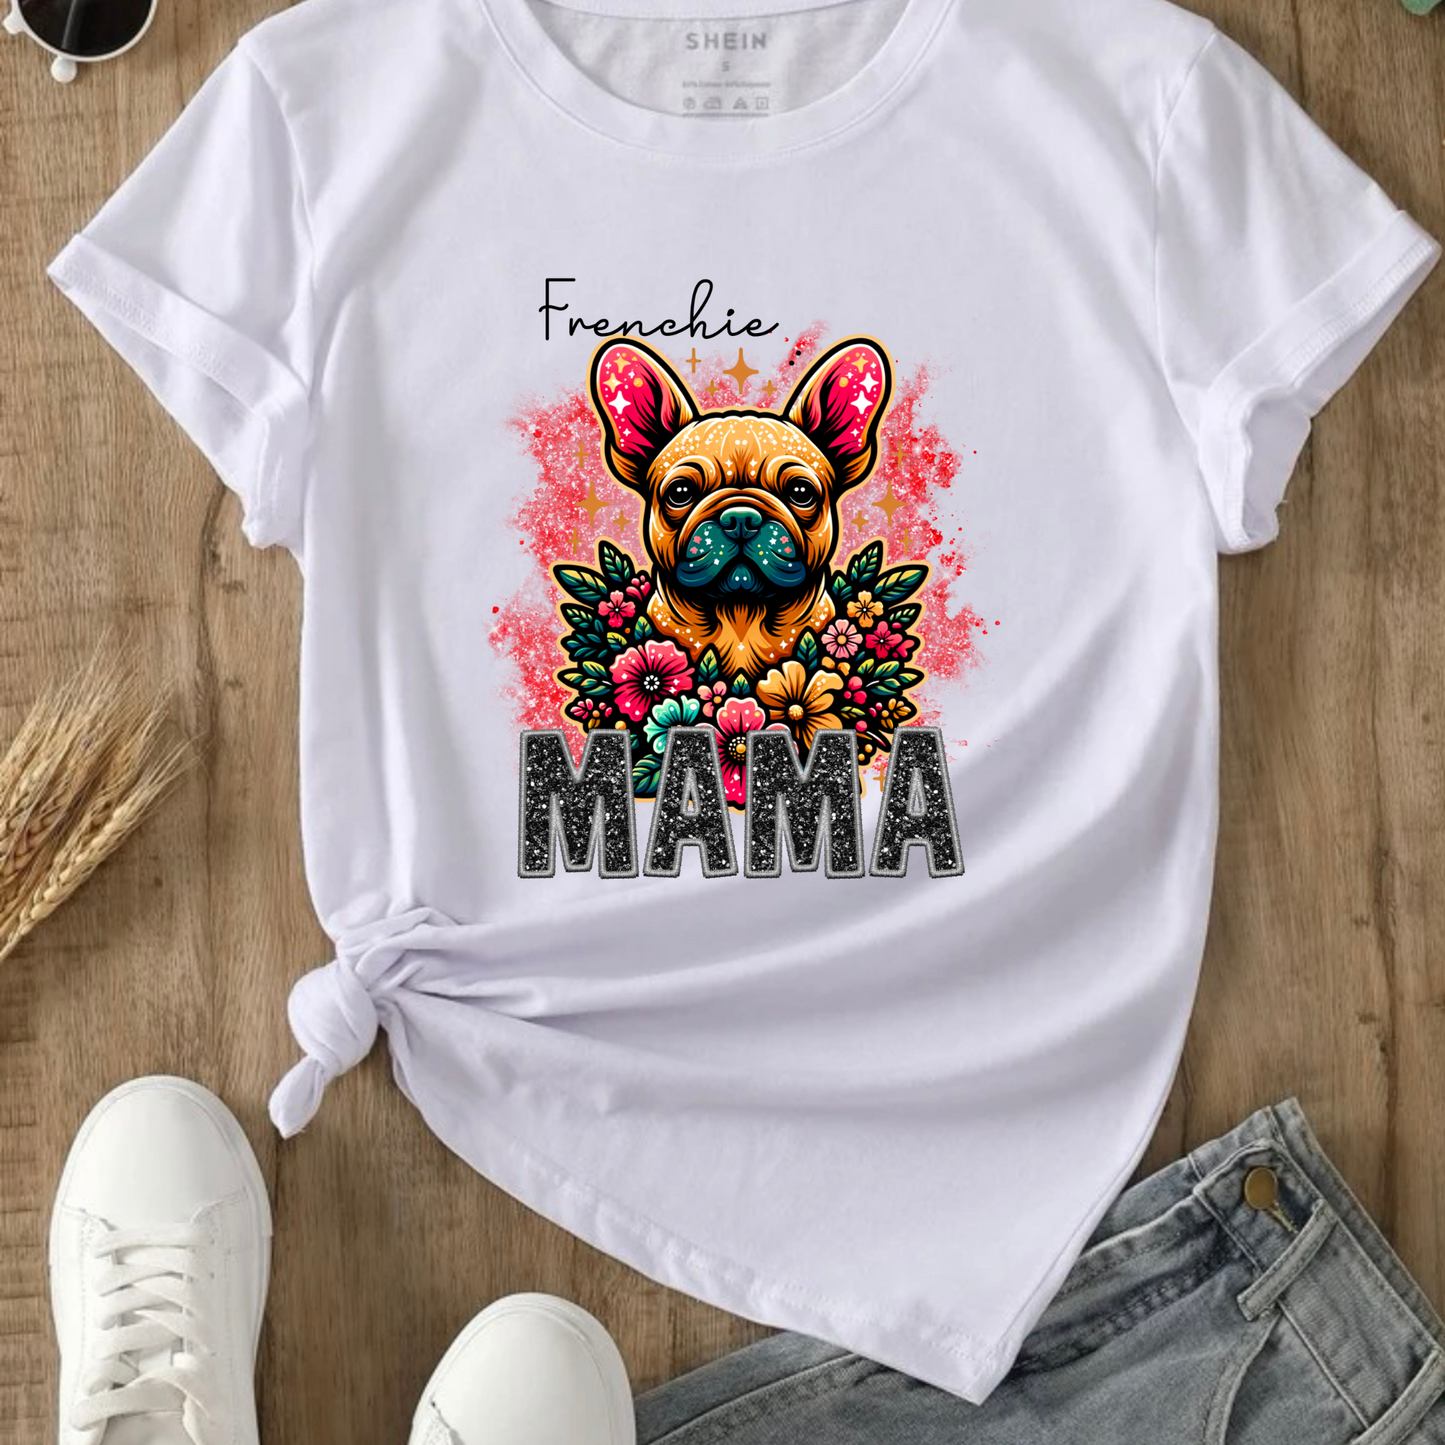 FRENCHIE   MAMA DESIGN! YOU CHOOSE COLOR AND STYLE! TEE OR CREWNECK! BLEACHED OR NON-BLEACHED